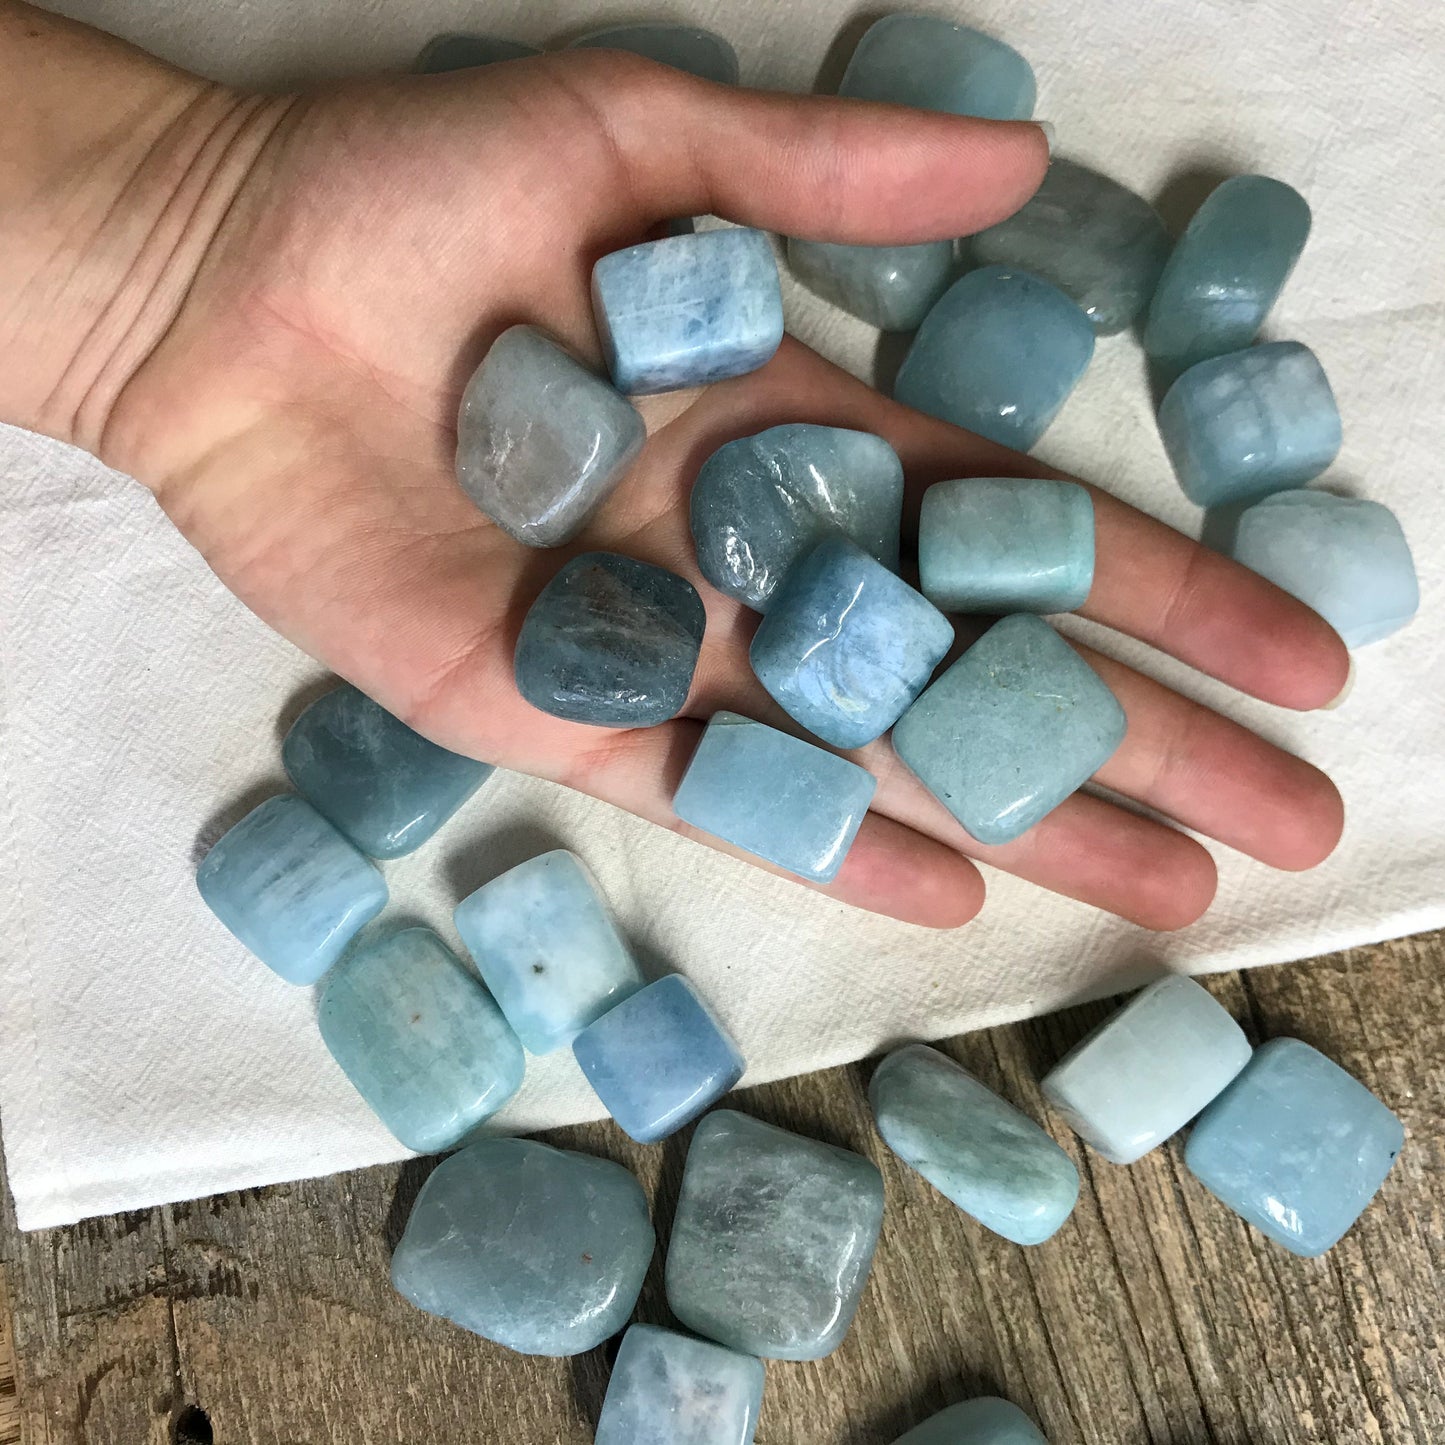 Polished Aquamarine Tumbled Stone (Approx  5/8" - 7/8") for Wire Wrapping or Crystal Grid Supply BIN-1347